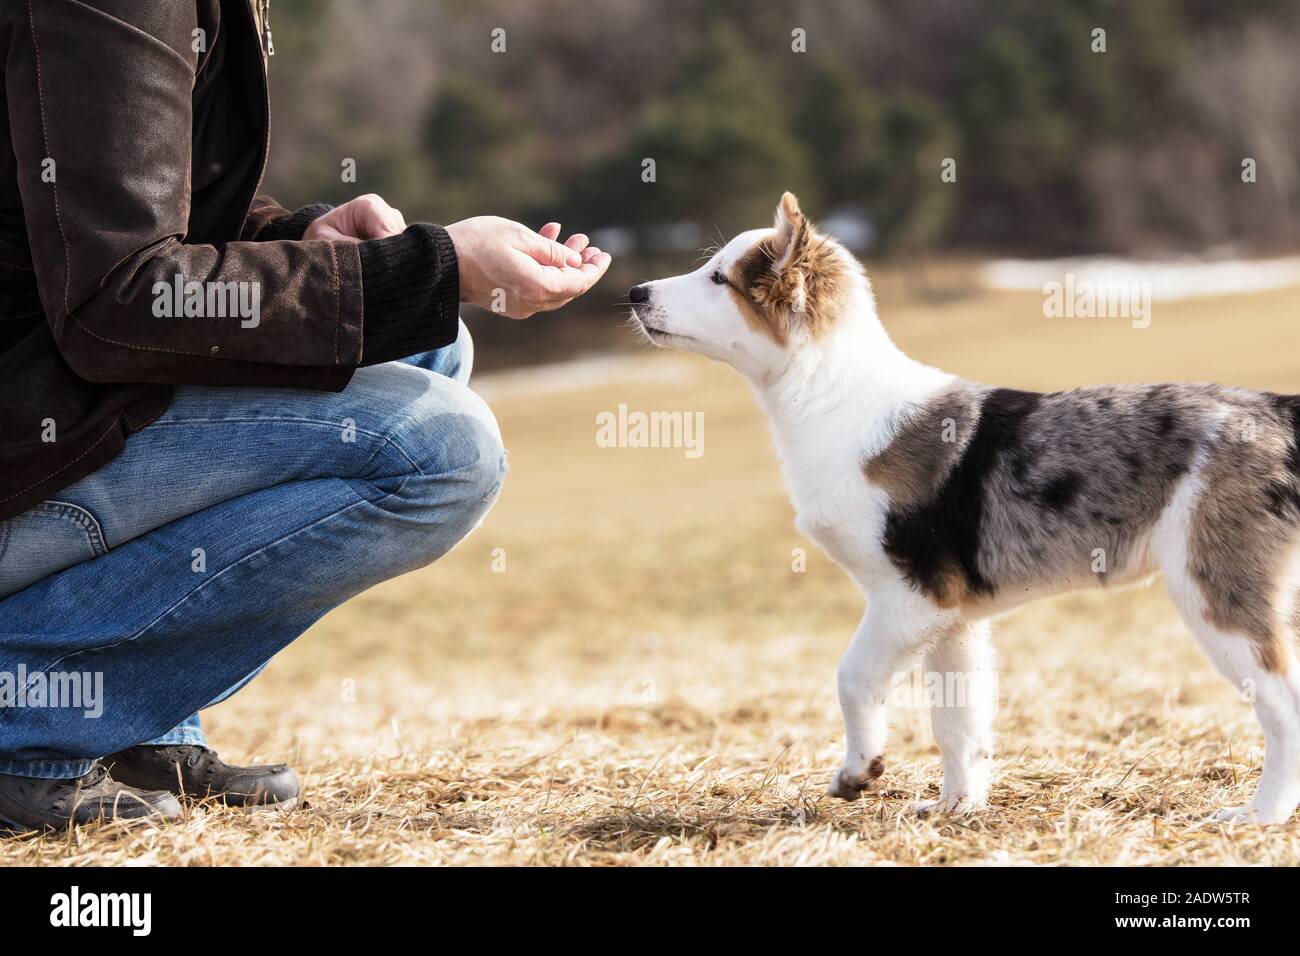 man is feeding his puppy dog, while kneeing on a meadow Stock Photo